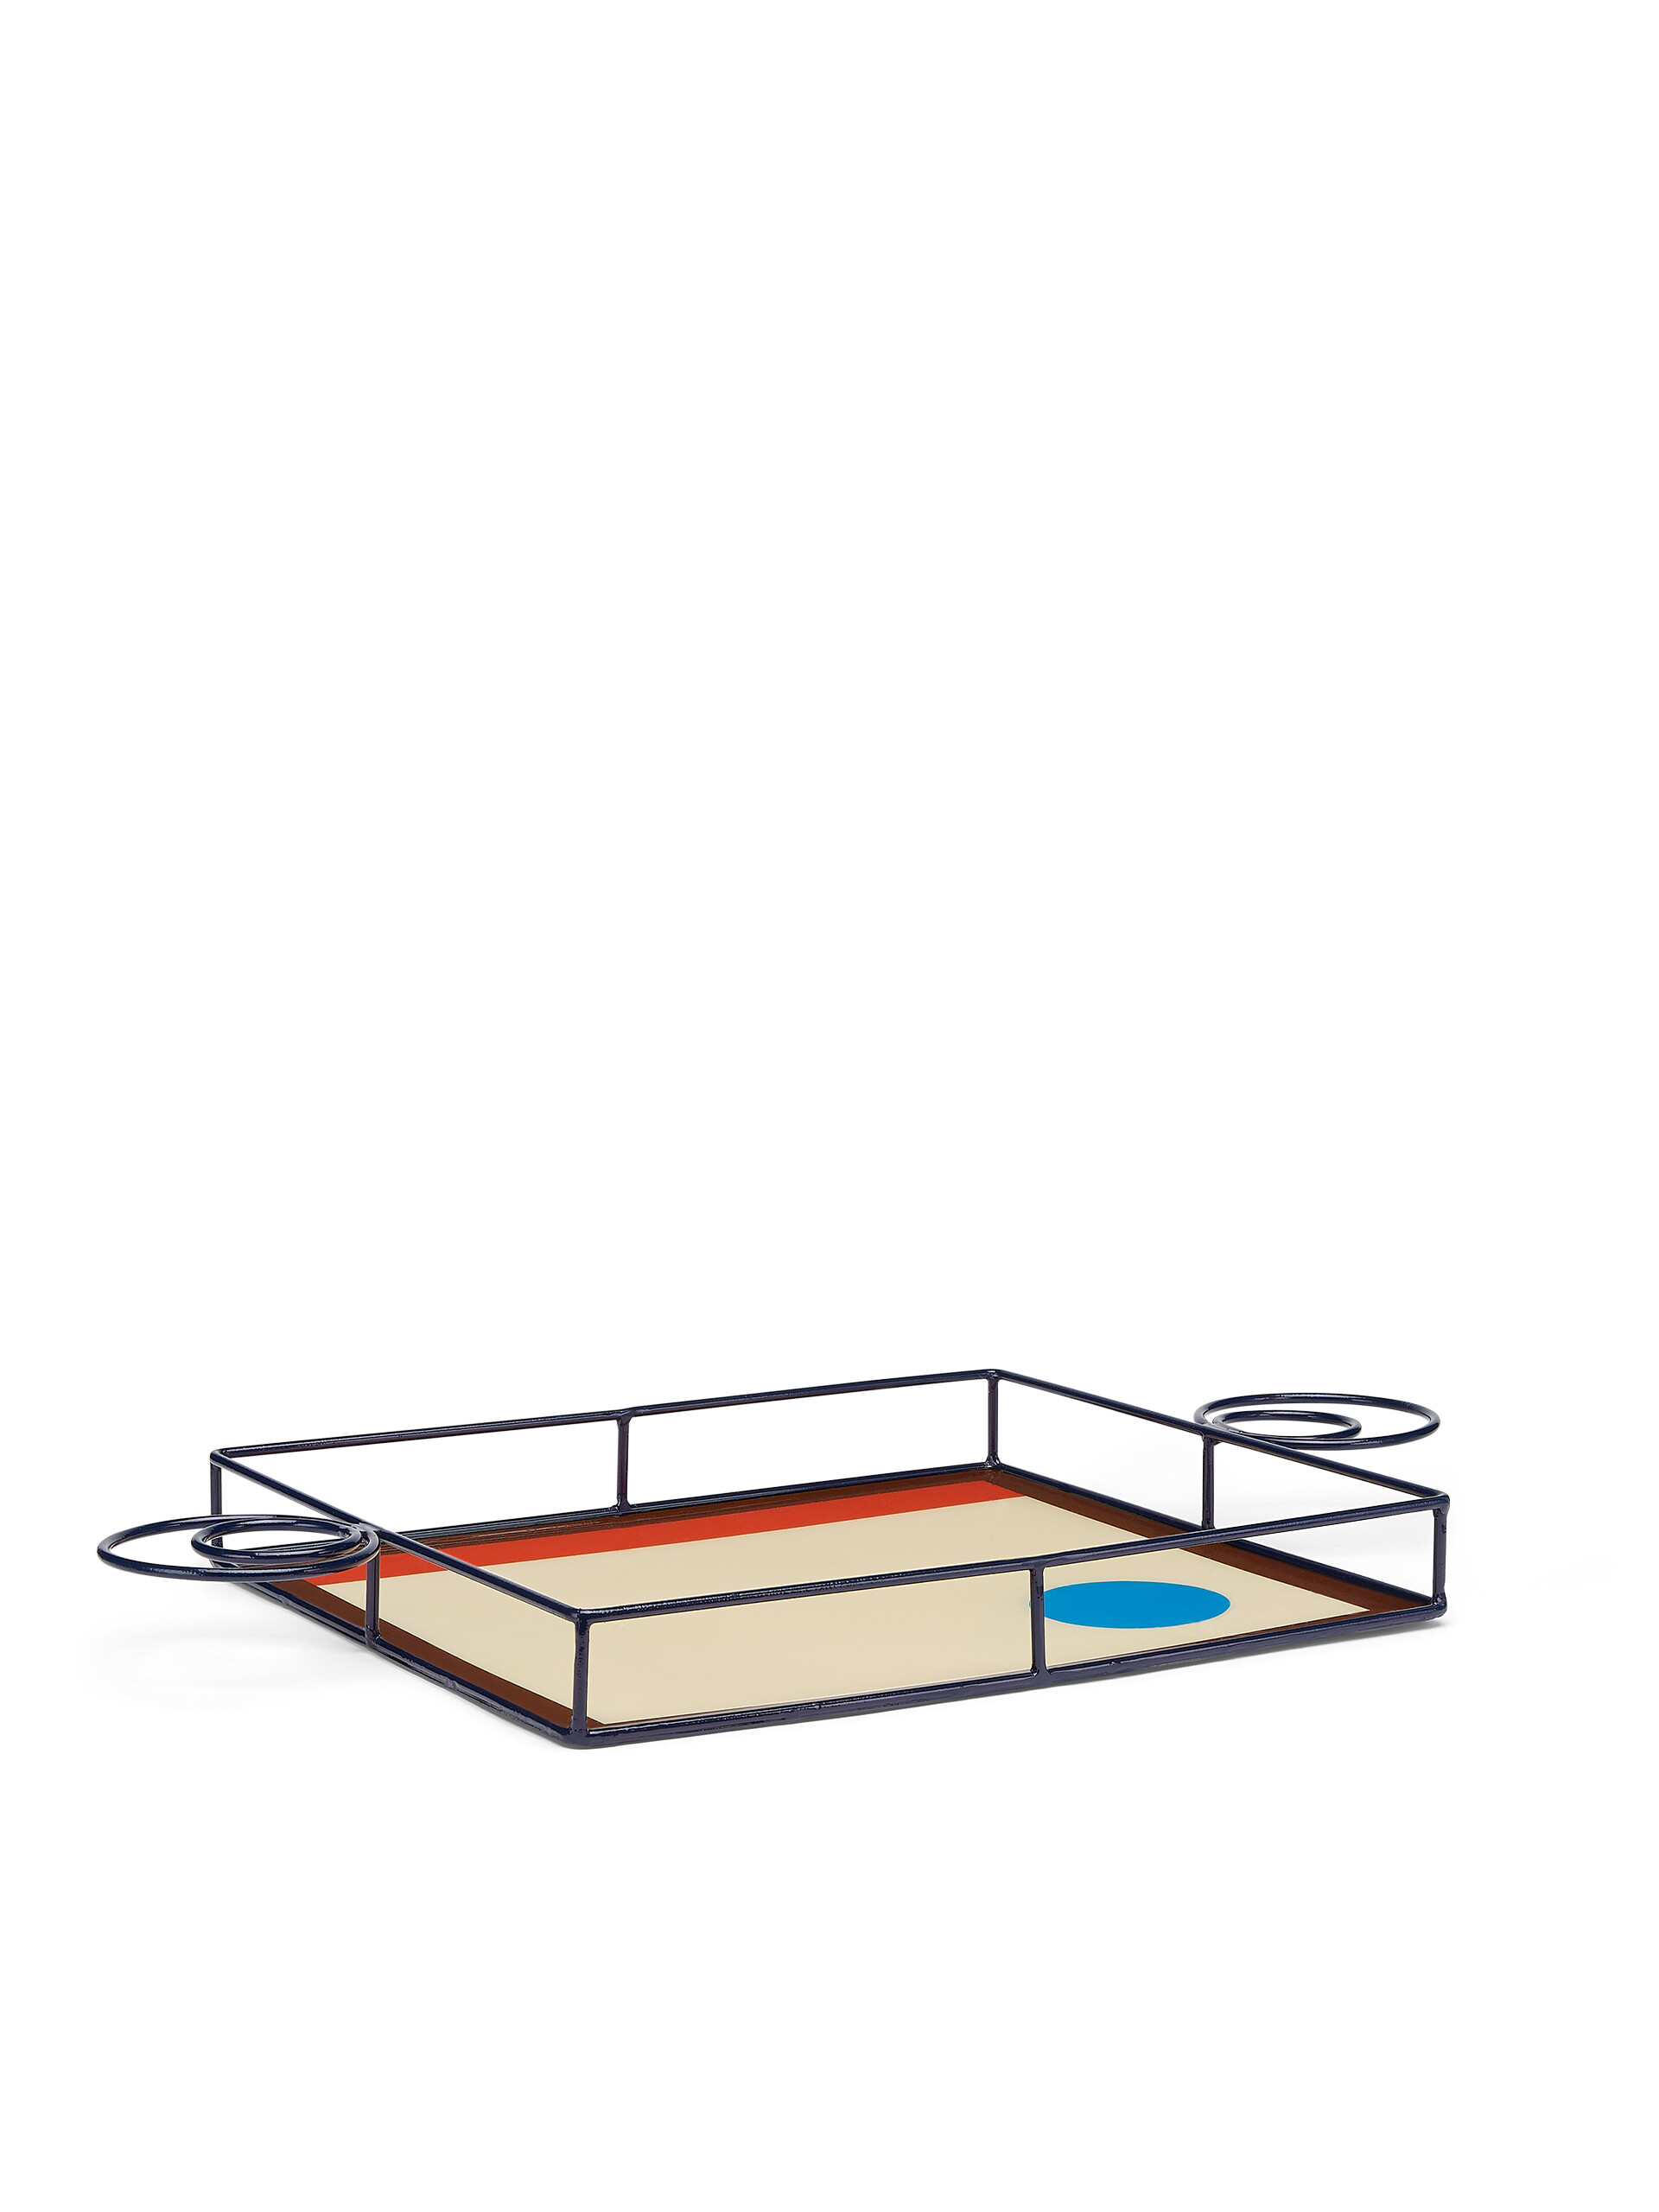 MARNI MARKET rectangular tray in iron and beige, blue, brown and red resin - Accessories - Image 2